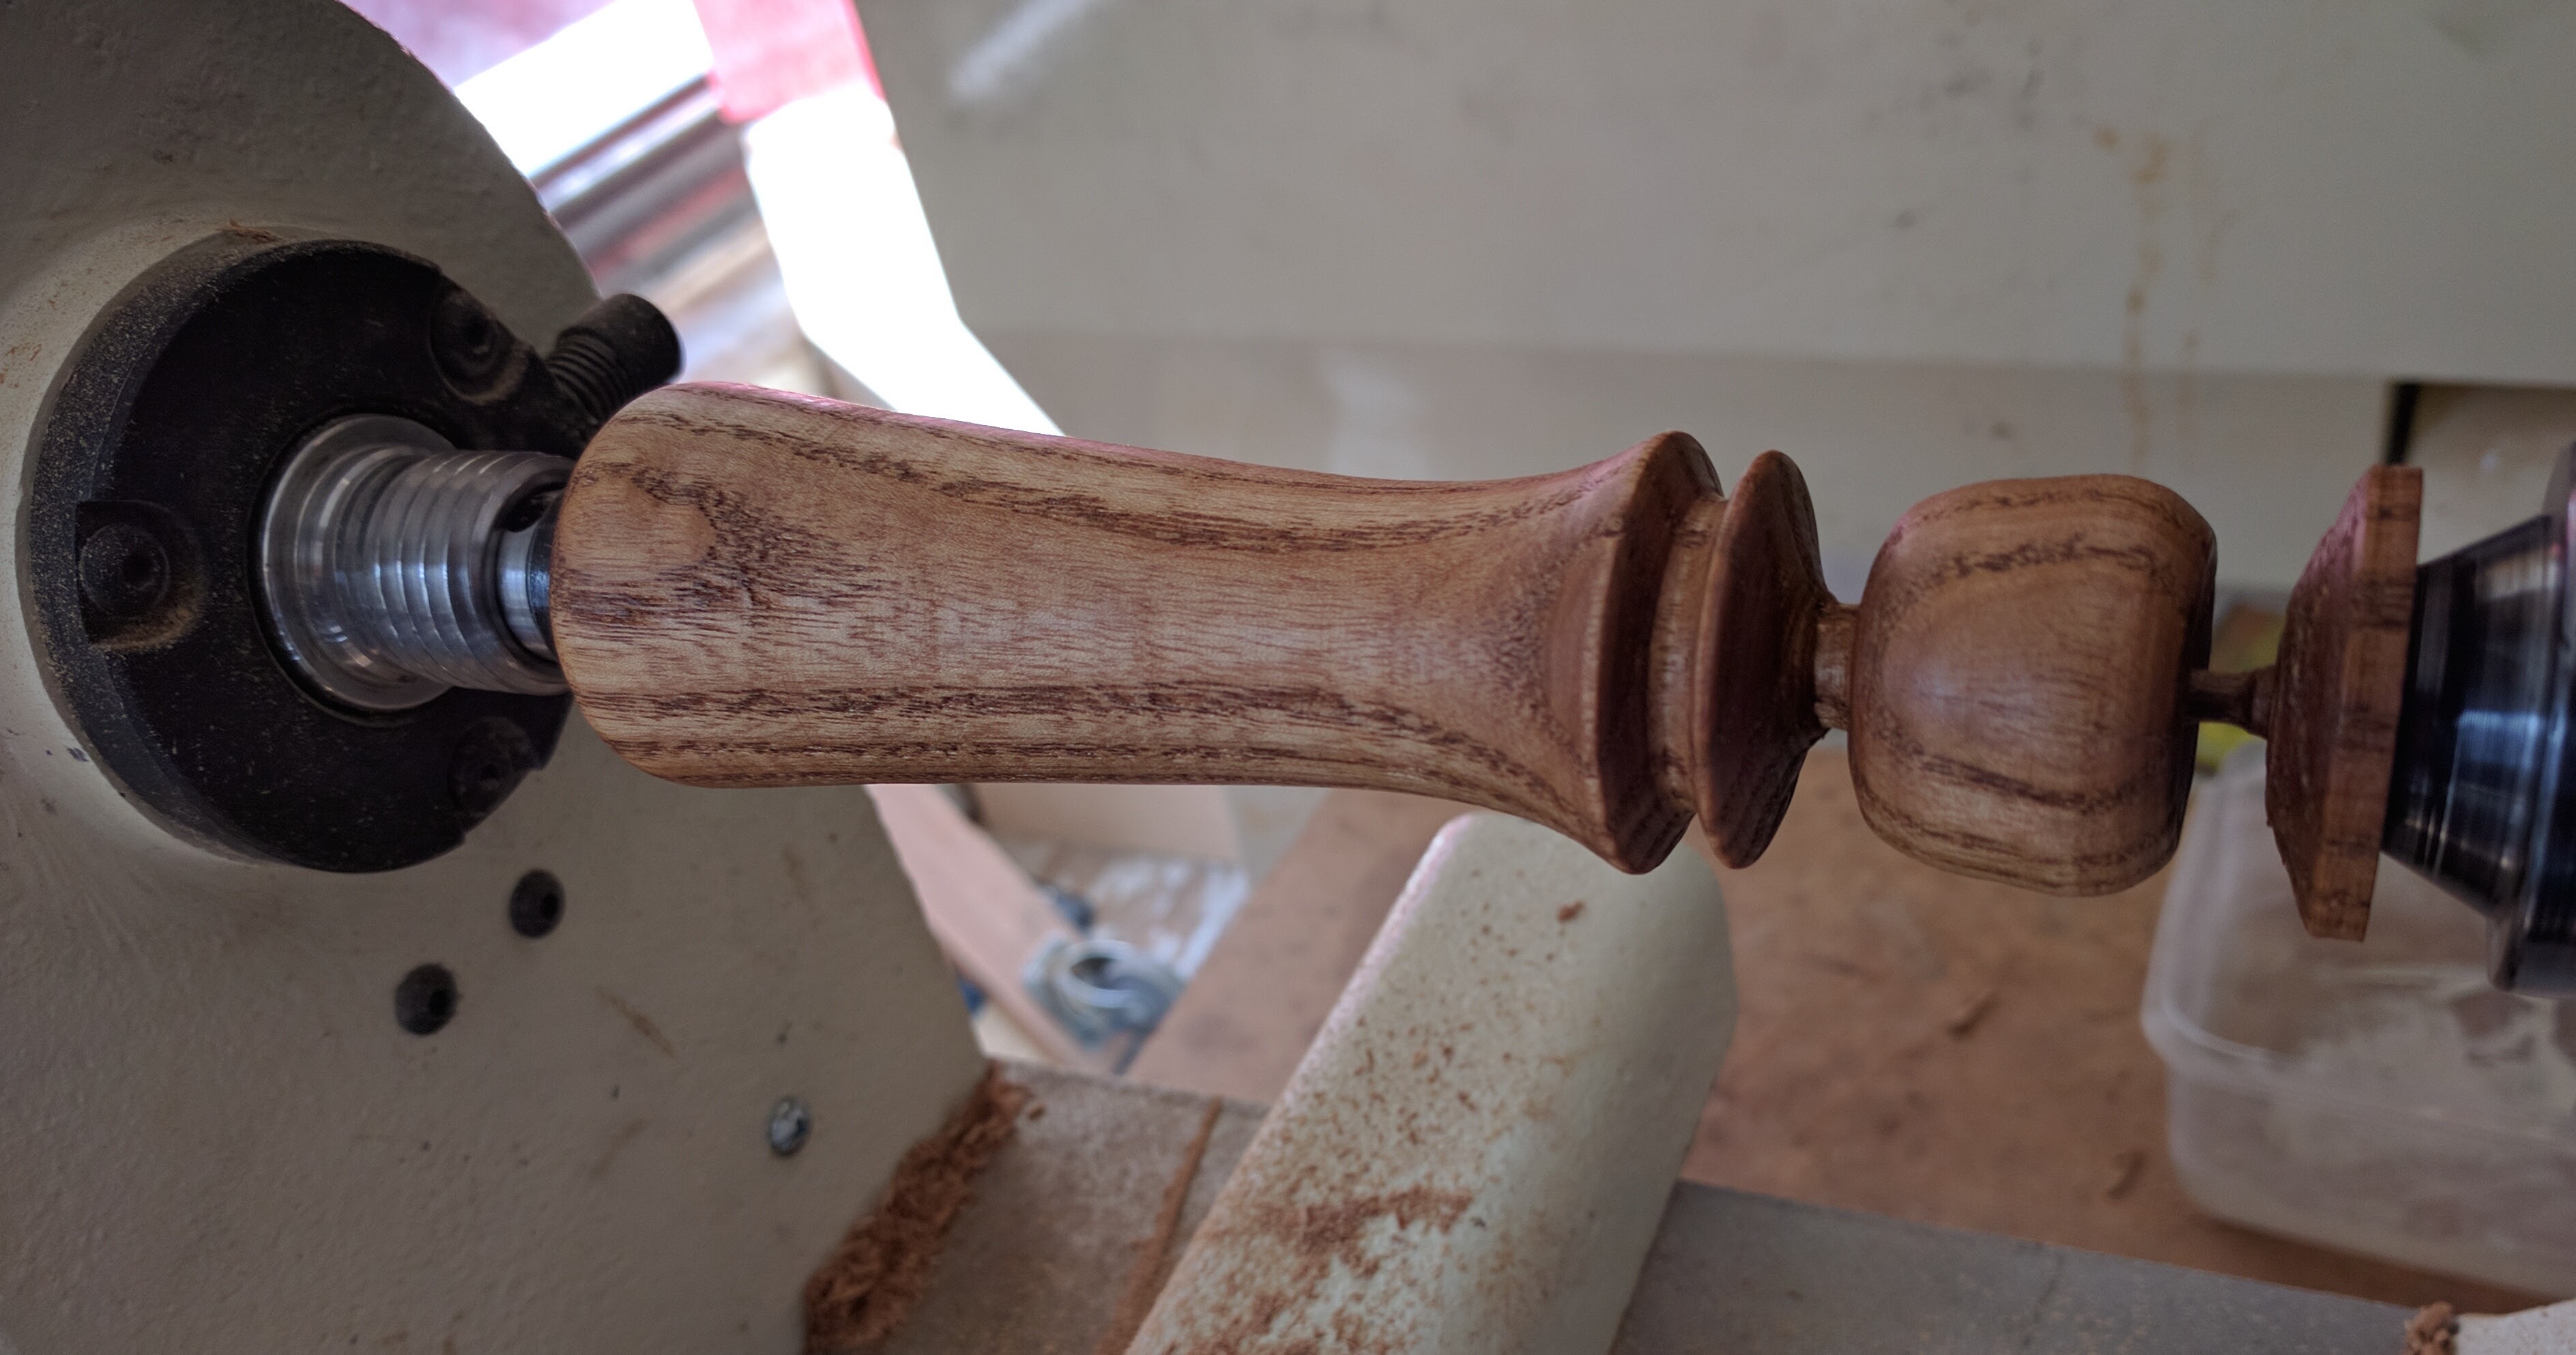 main stand of the towel holder when it is on the lathe being turned